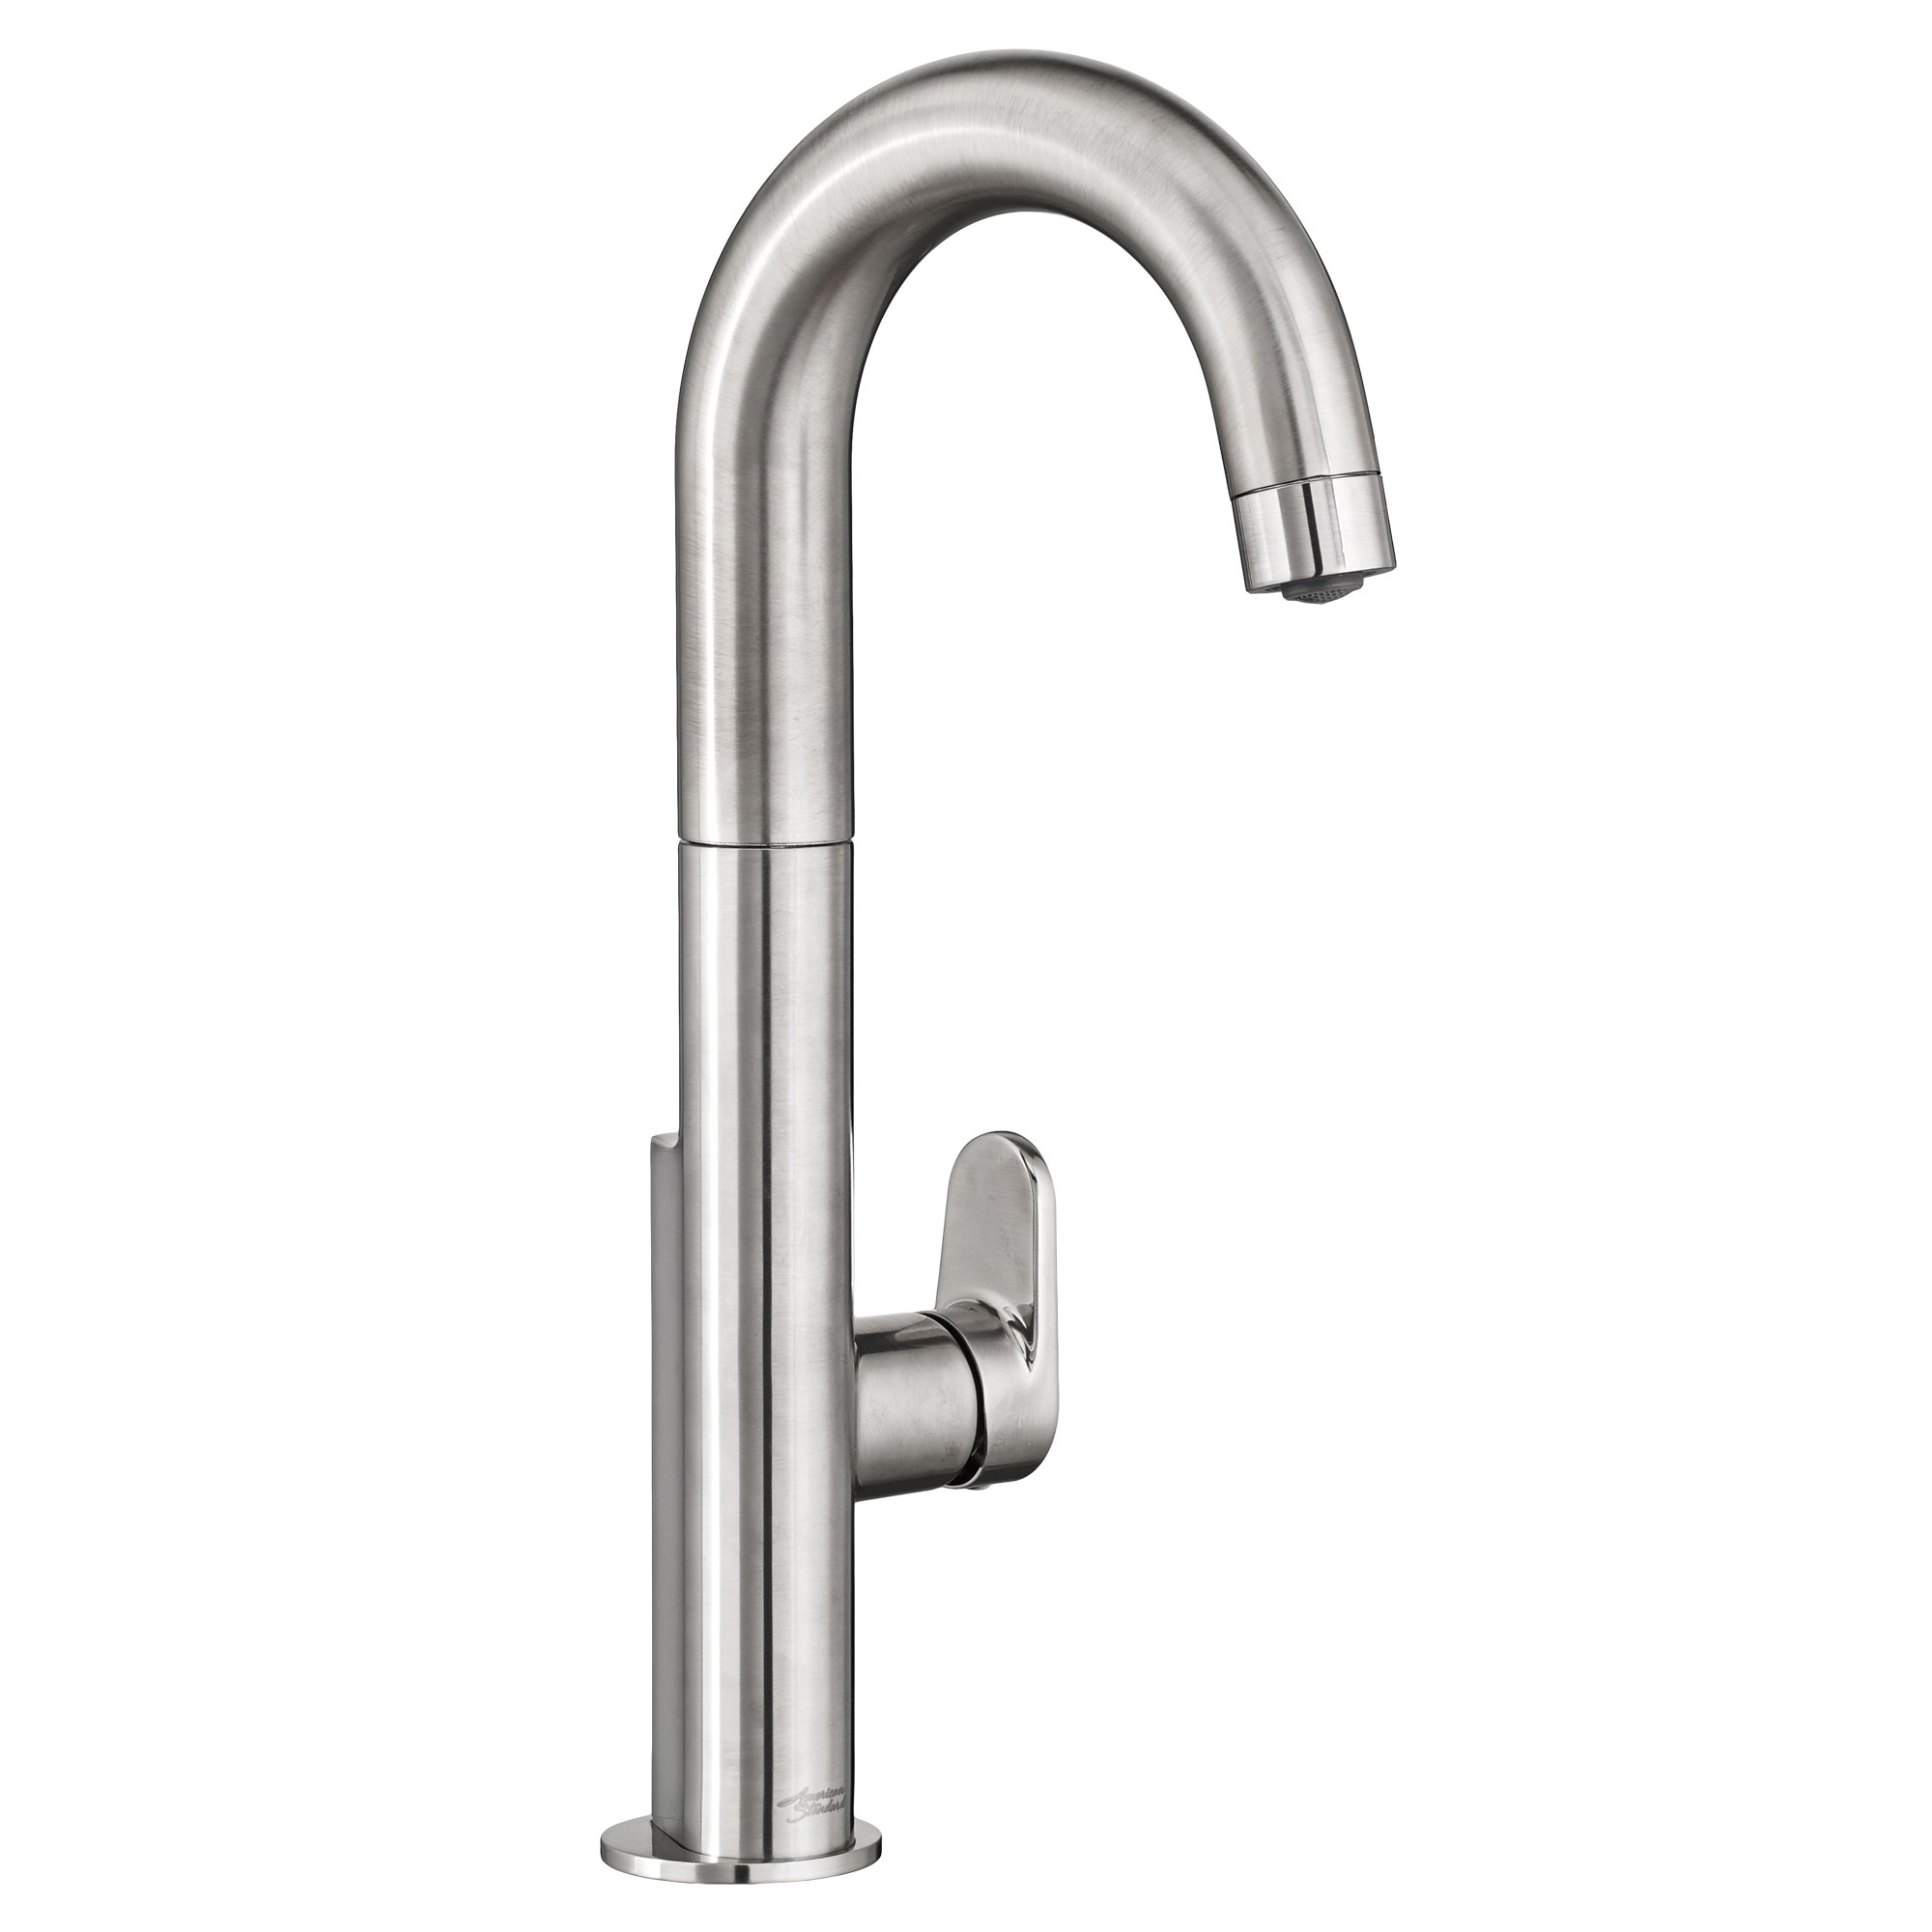 Beale® Single-Handle Pull-Down Single Spray Bar Faucet 1.5 gpm/5.7 L/min